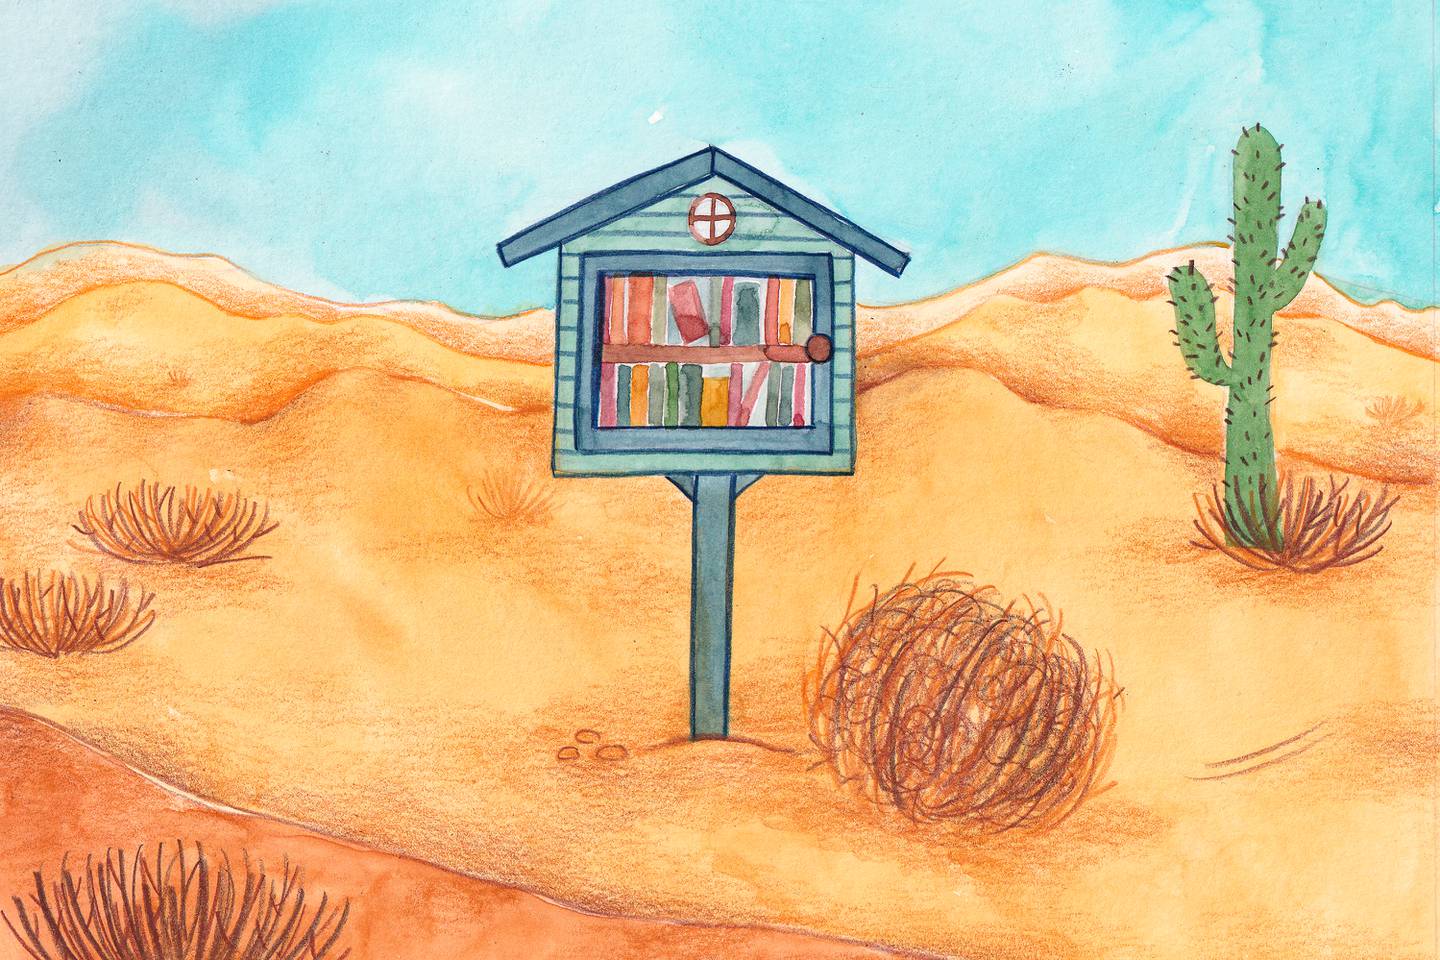 A Little Free Library in a desert.